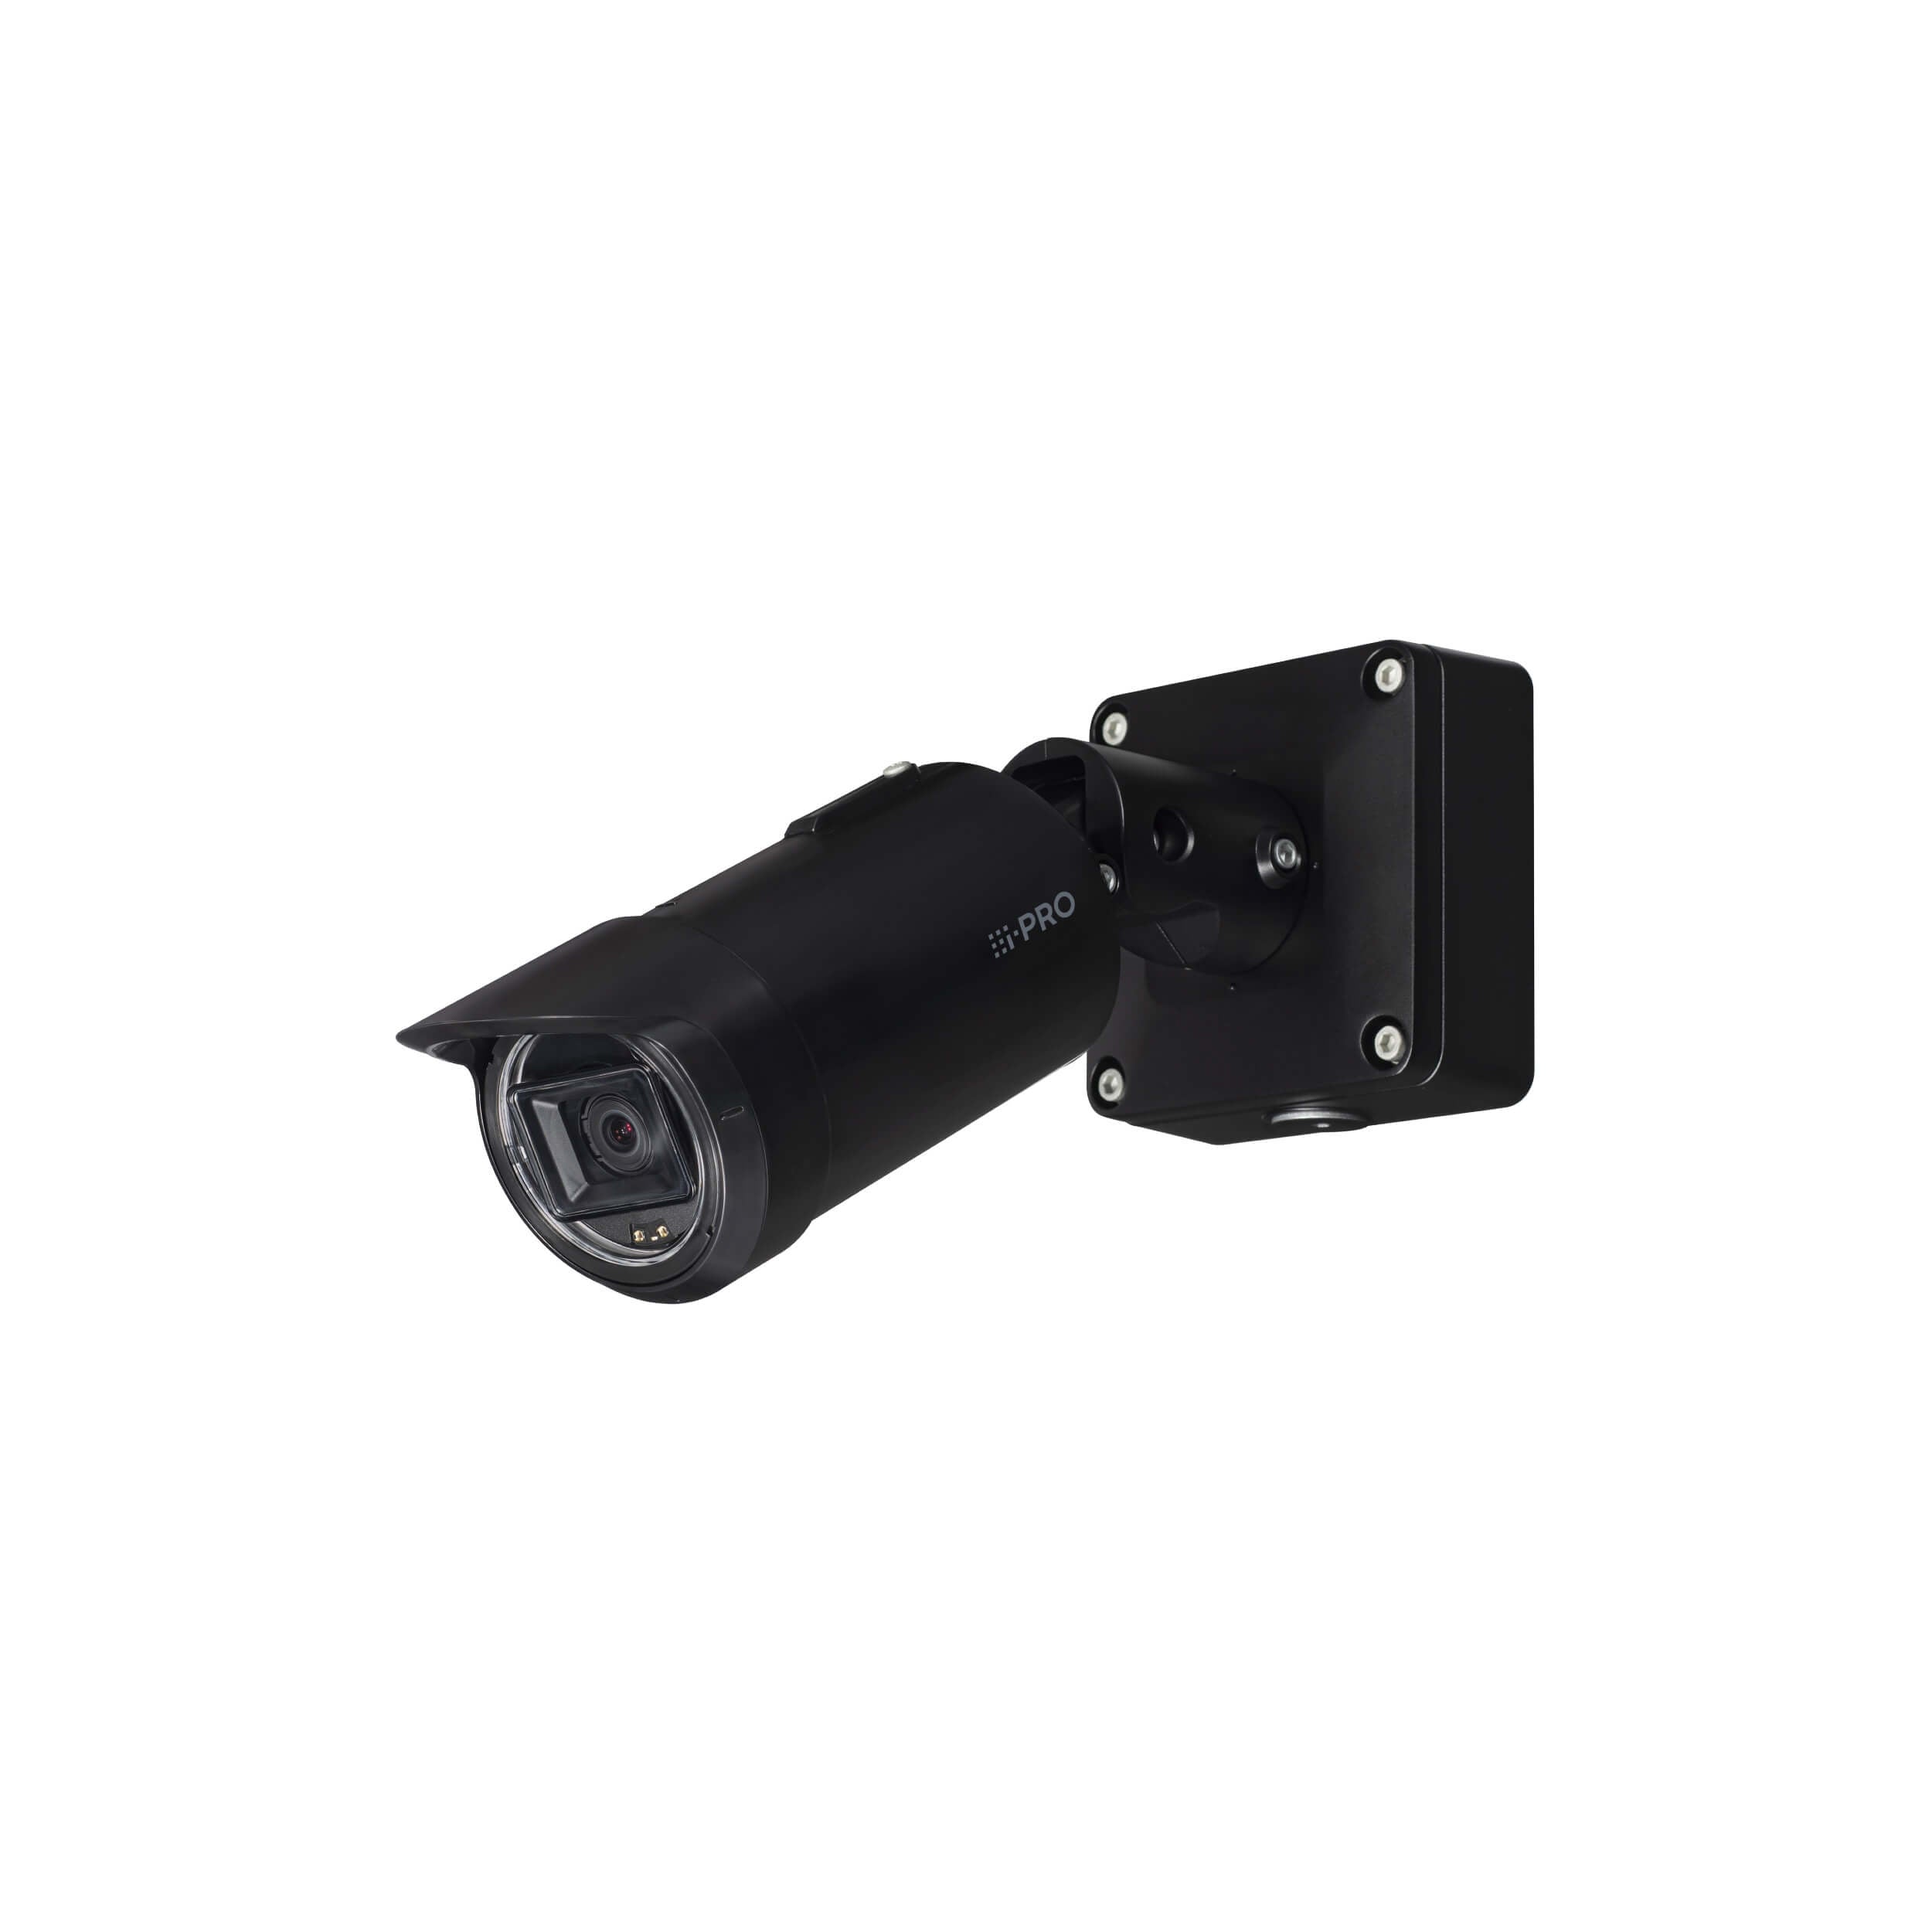 Panasonic WV-S15500-V3LN1 5MP Outdoor Bullet Network Camera with AI Engine with 2.9-9mm Lens